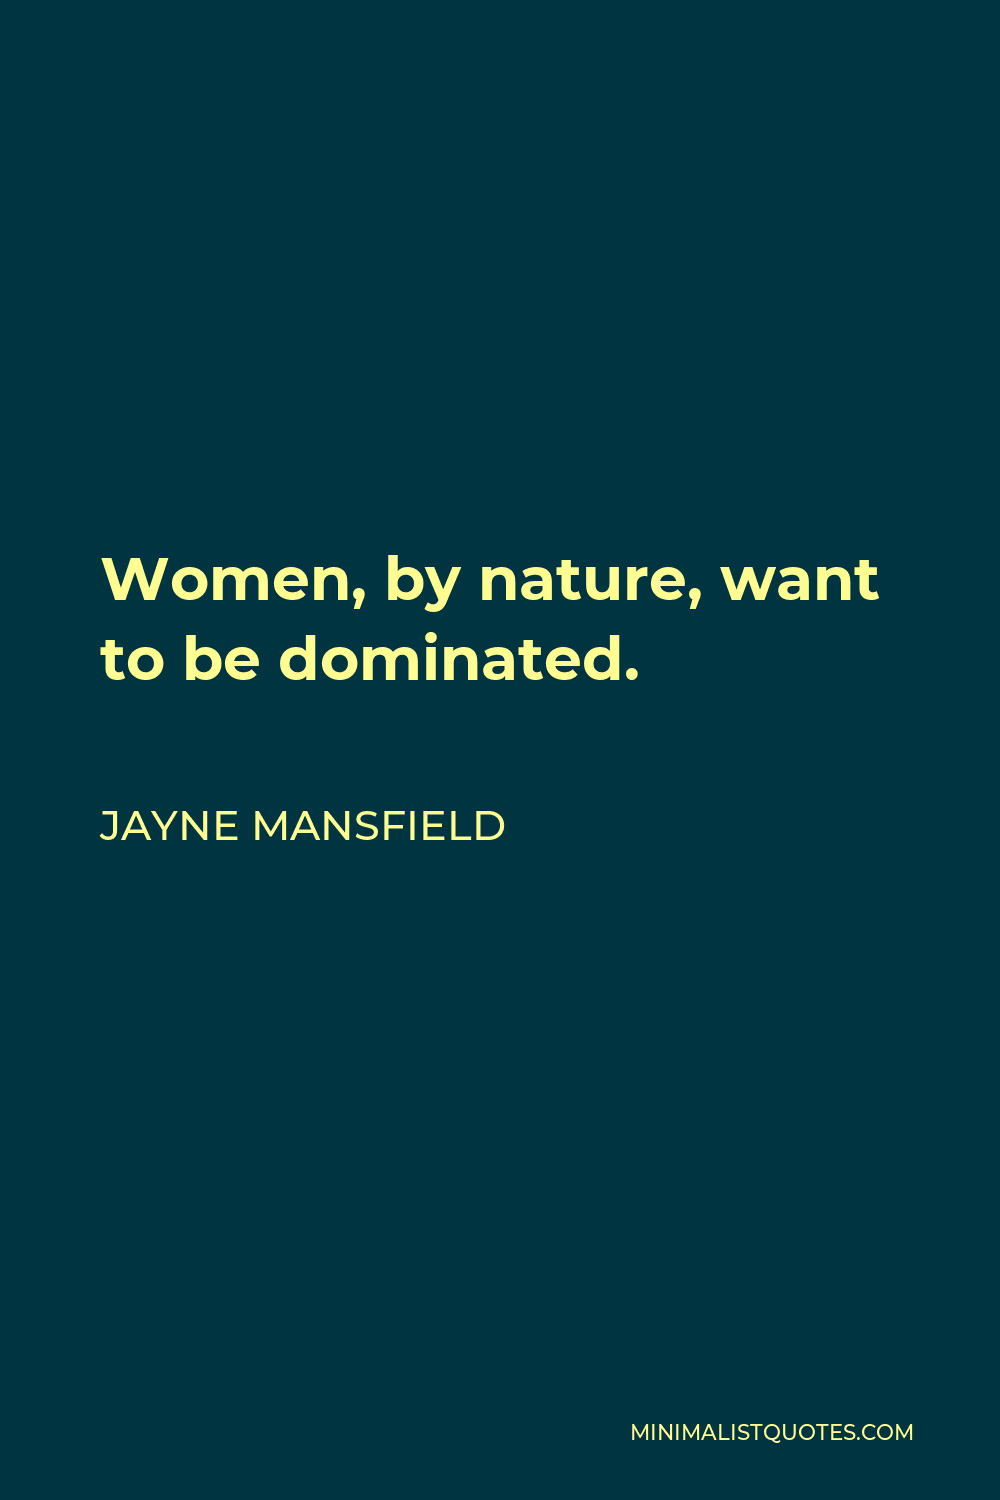 Jayne Mansfield Quote: “A 41-inch bust and a lot of perseverance